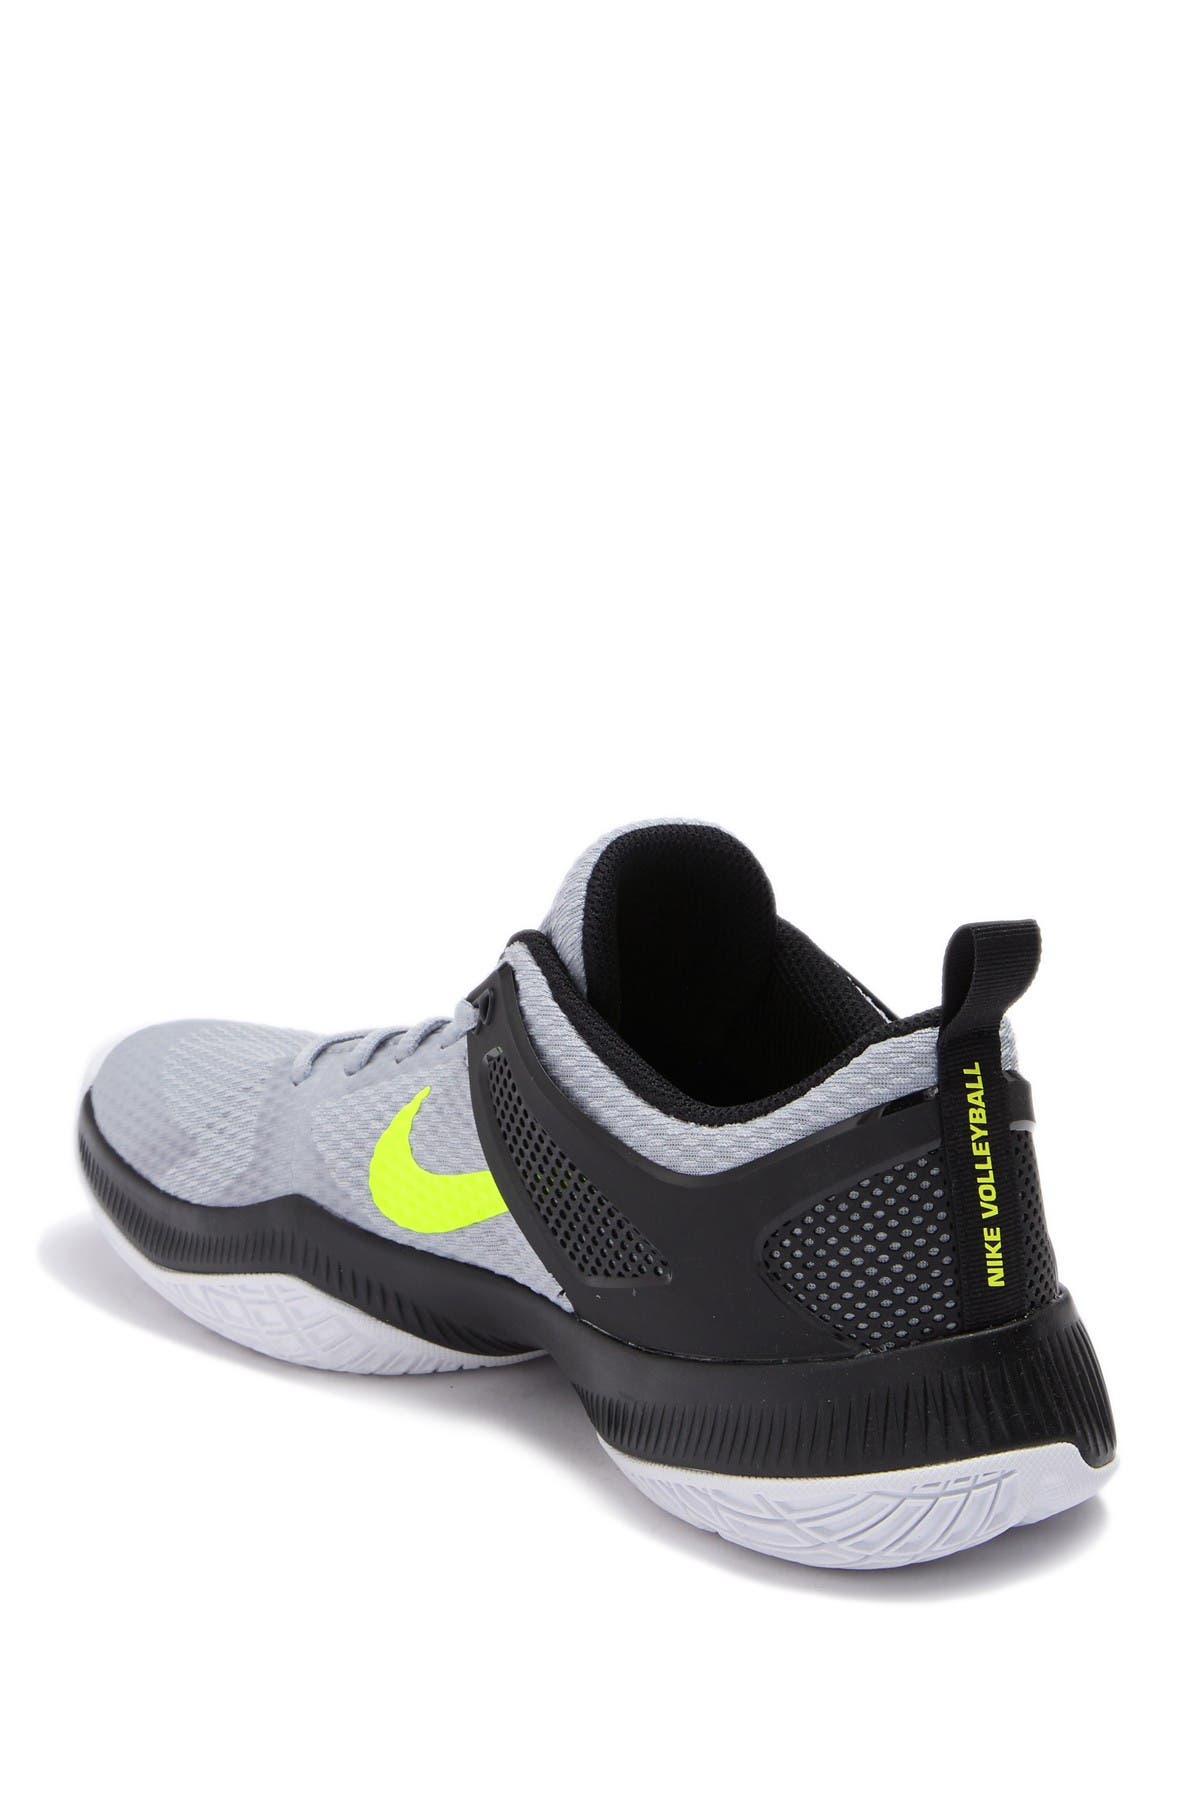 nike air zoom hyperattack volleyball